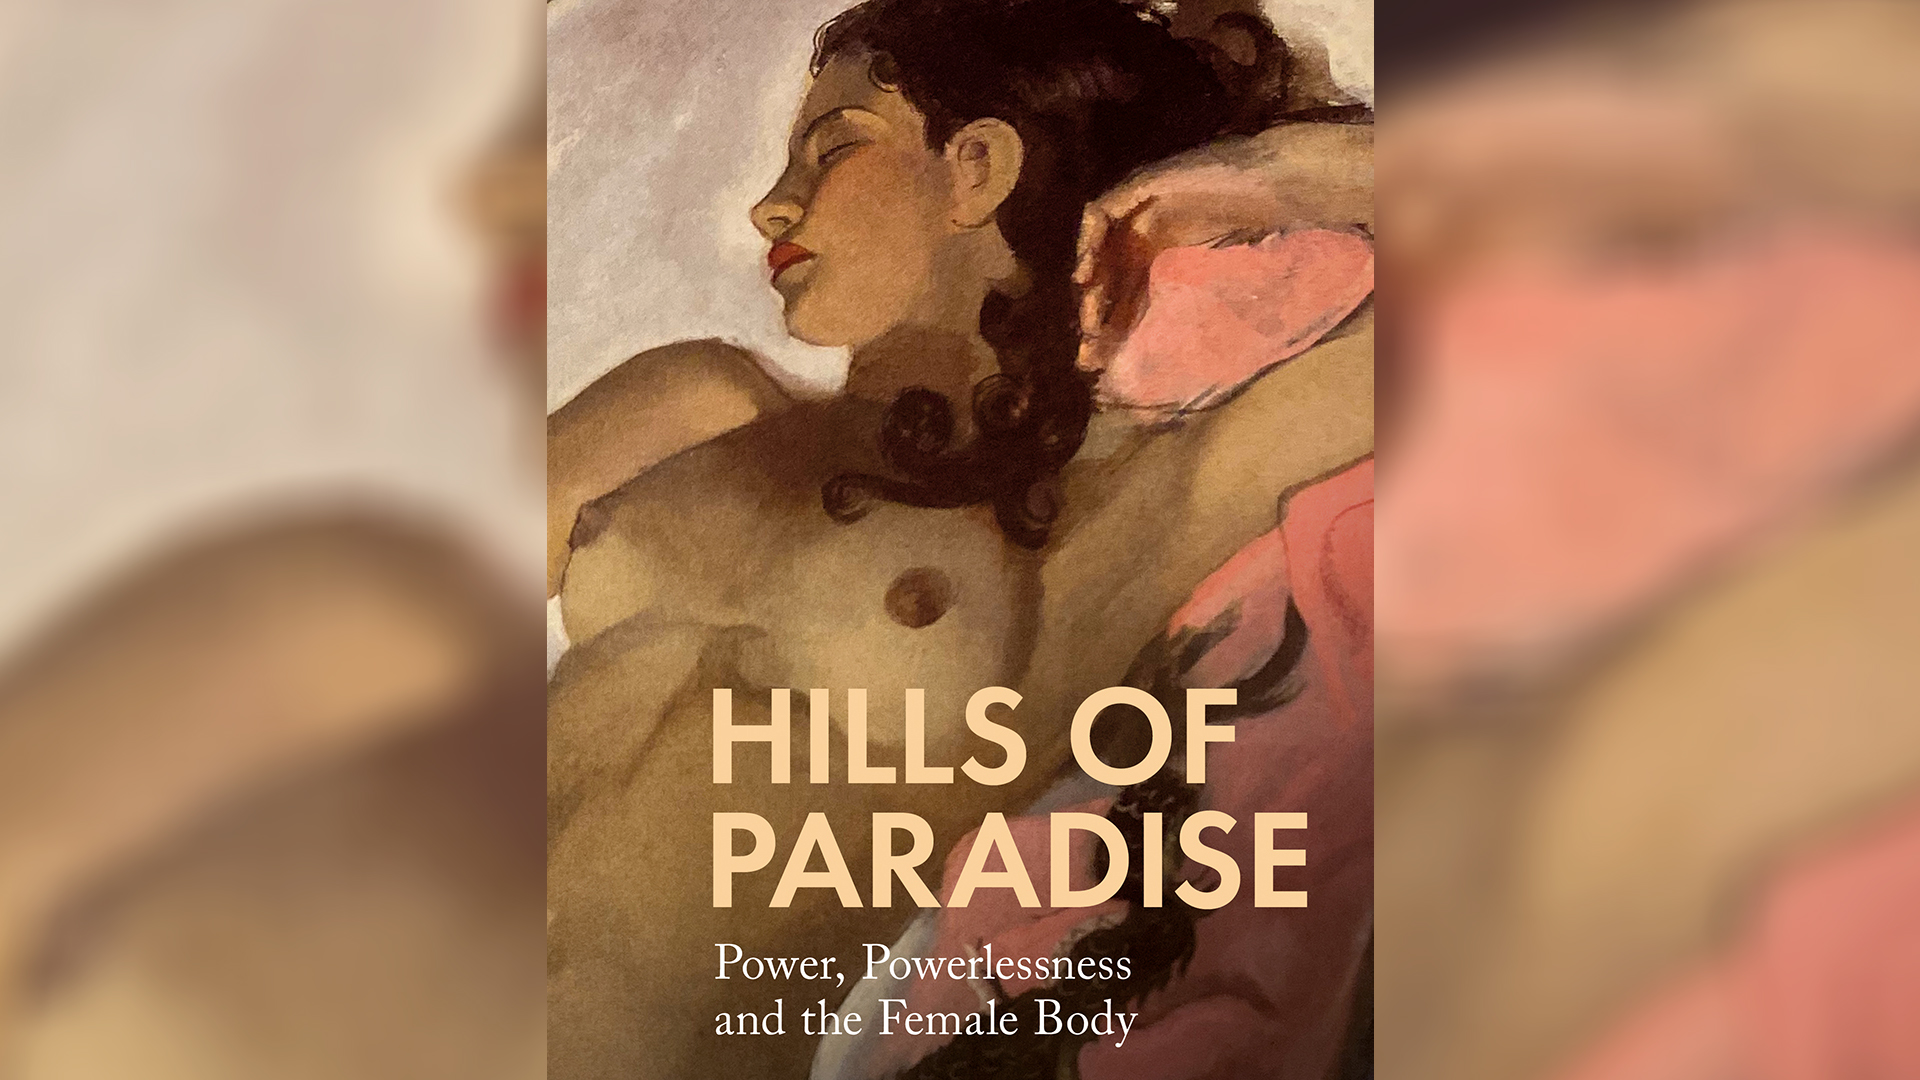 Hills of Paradise: Power, Powerlessness and the Female Body - Fair